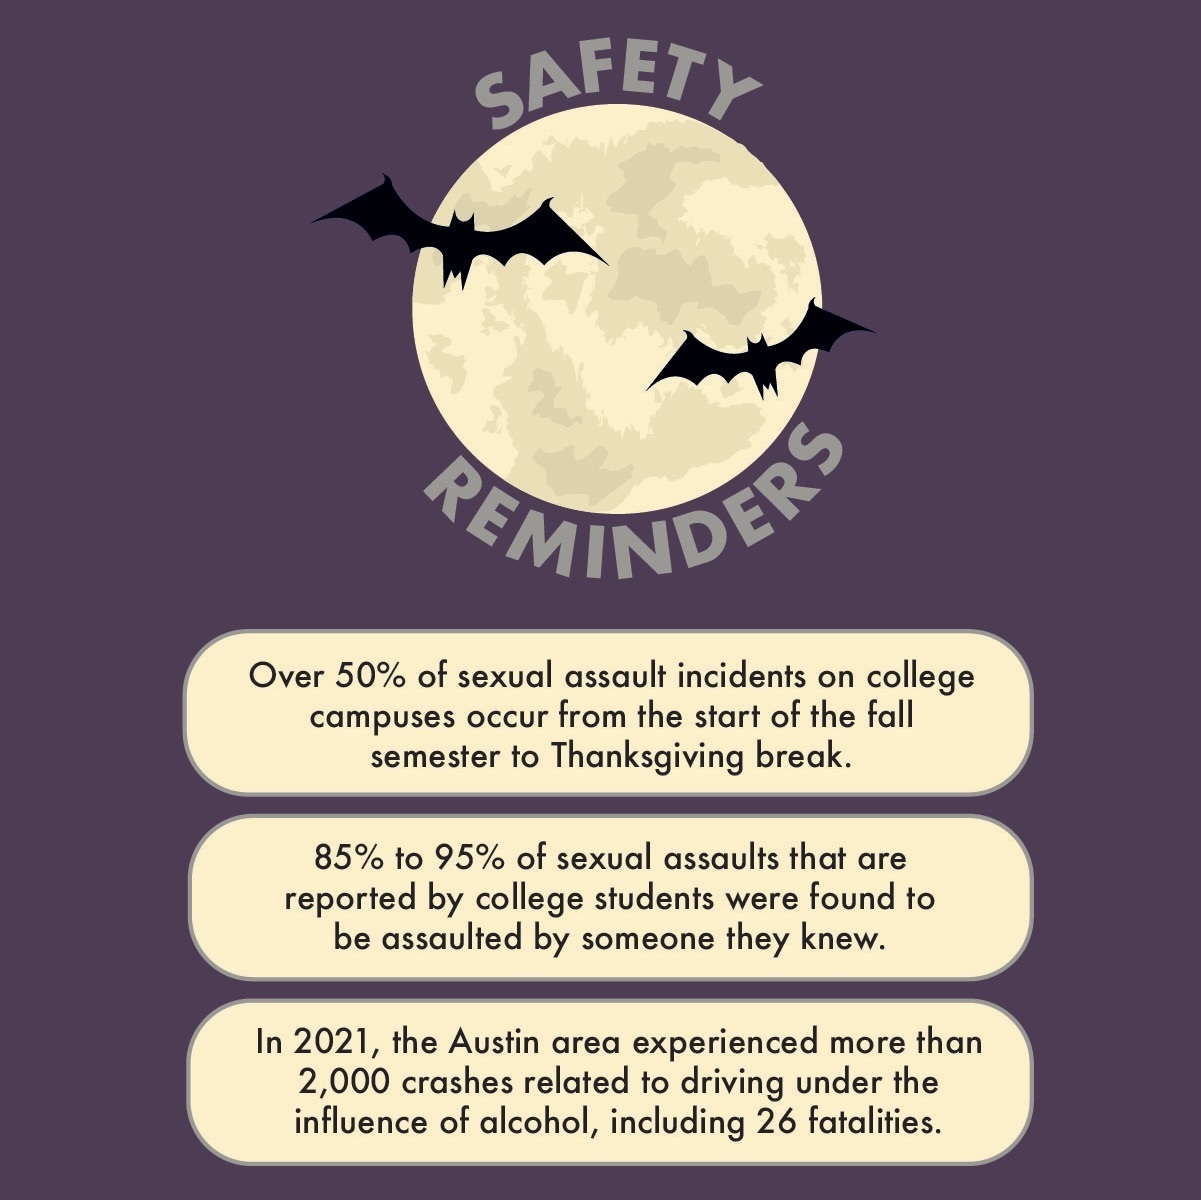 Halloweekend awareness and resources for students